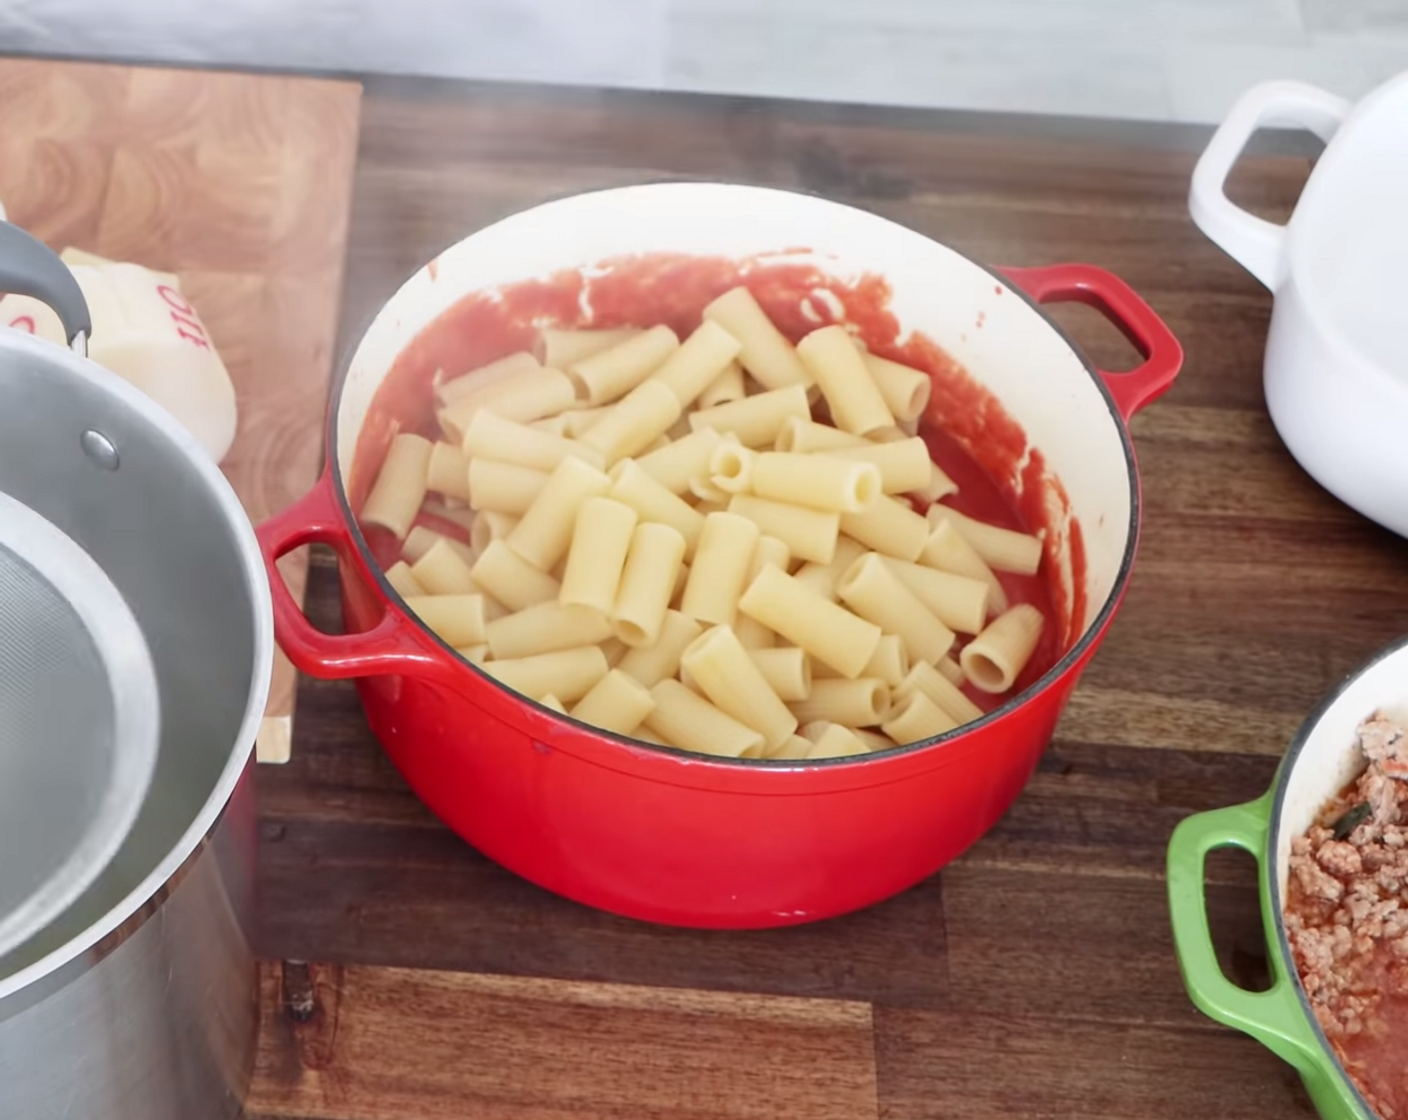 step 16 Once you have strained the pasta for your baked rigatoni, put it into the pot filled with sauce – not a mixing bowl! Mix the pasta and the sauce using a wooden spoon so each piece of pasta is completely covered.